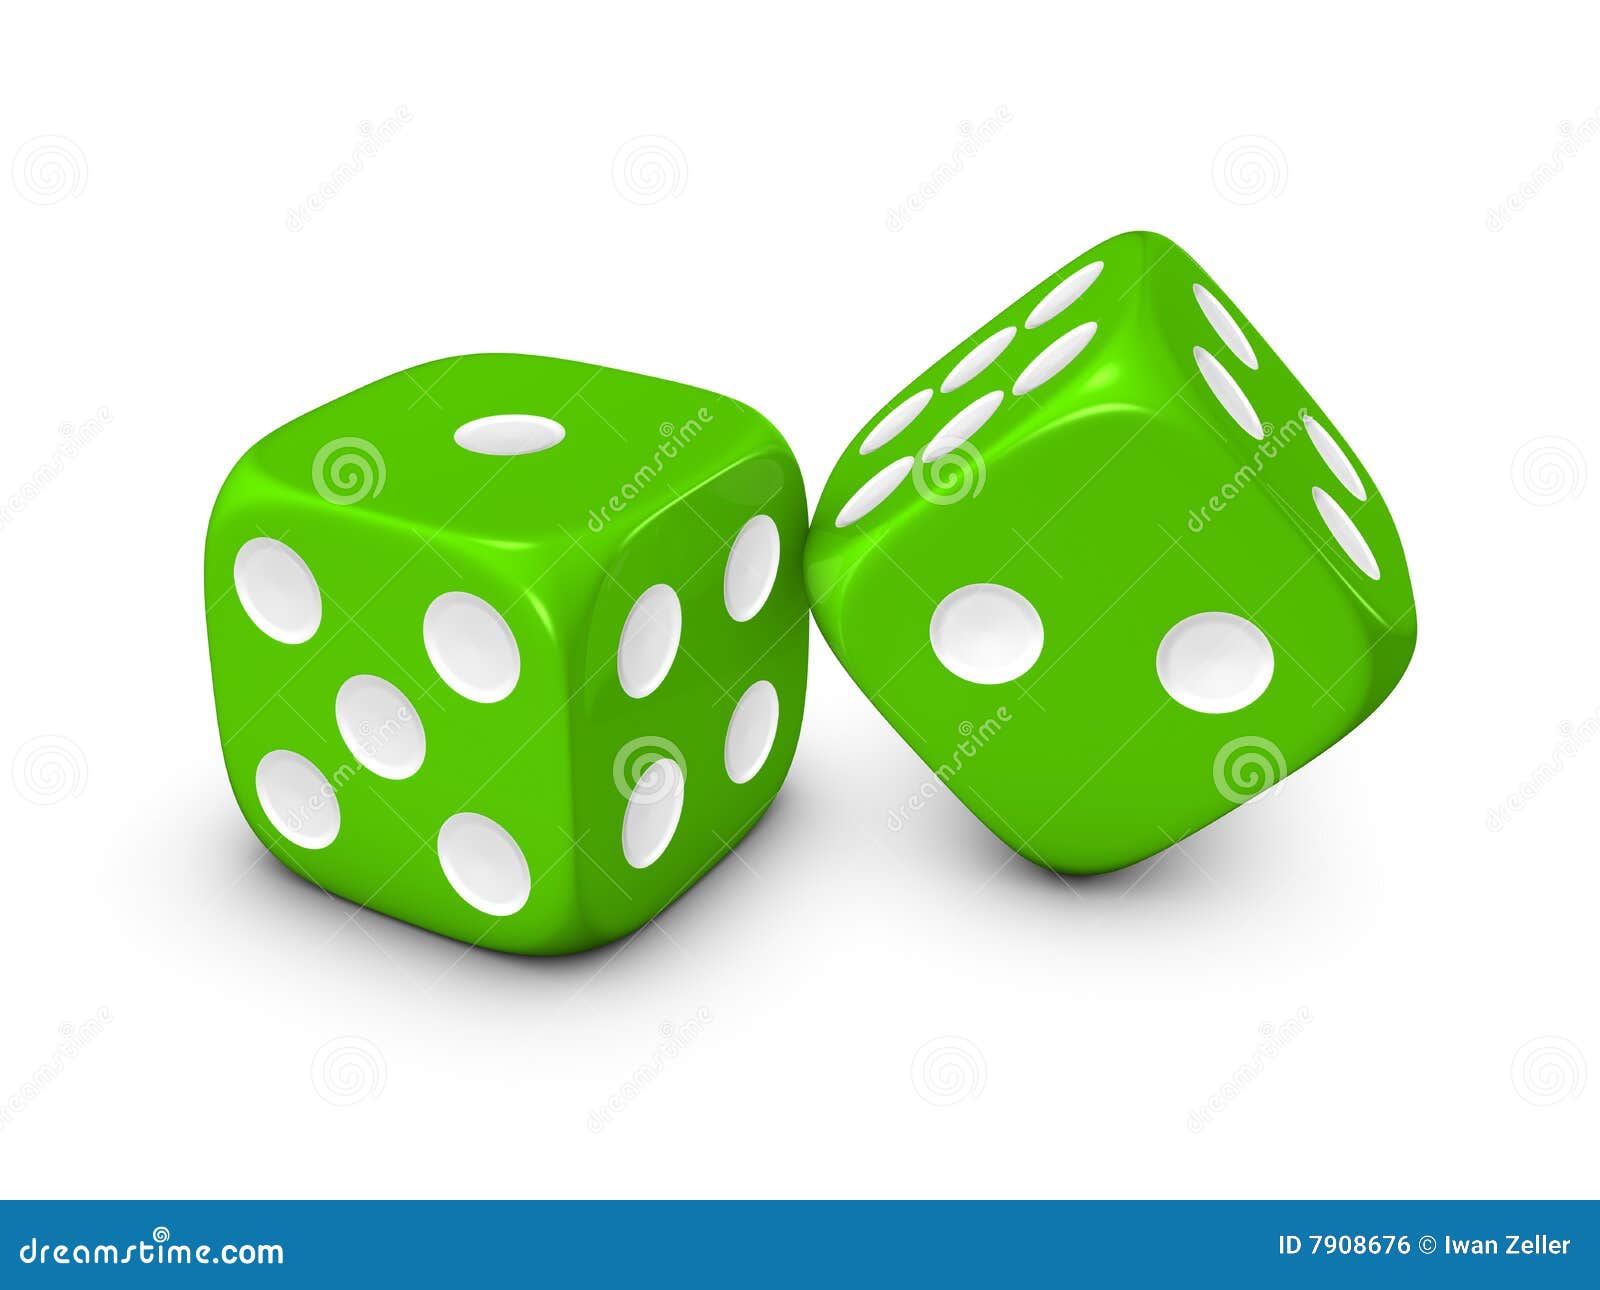 green dice clipart - photo #14